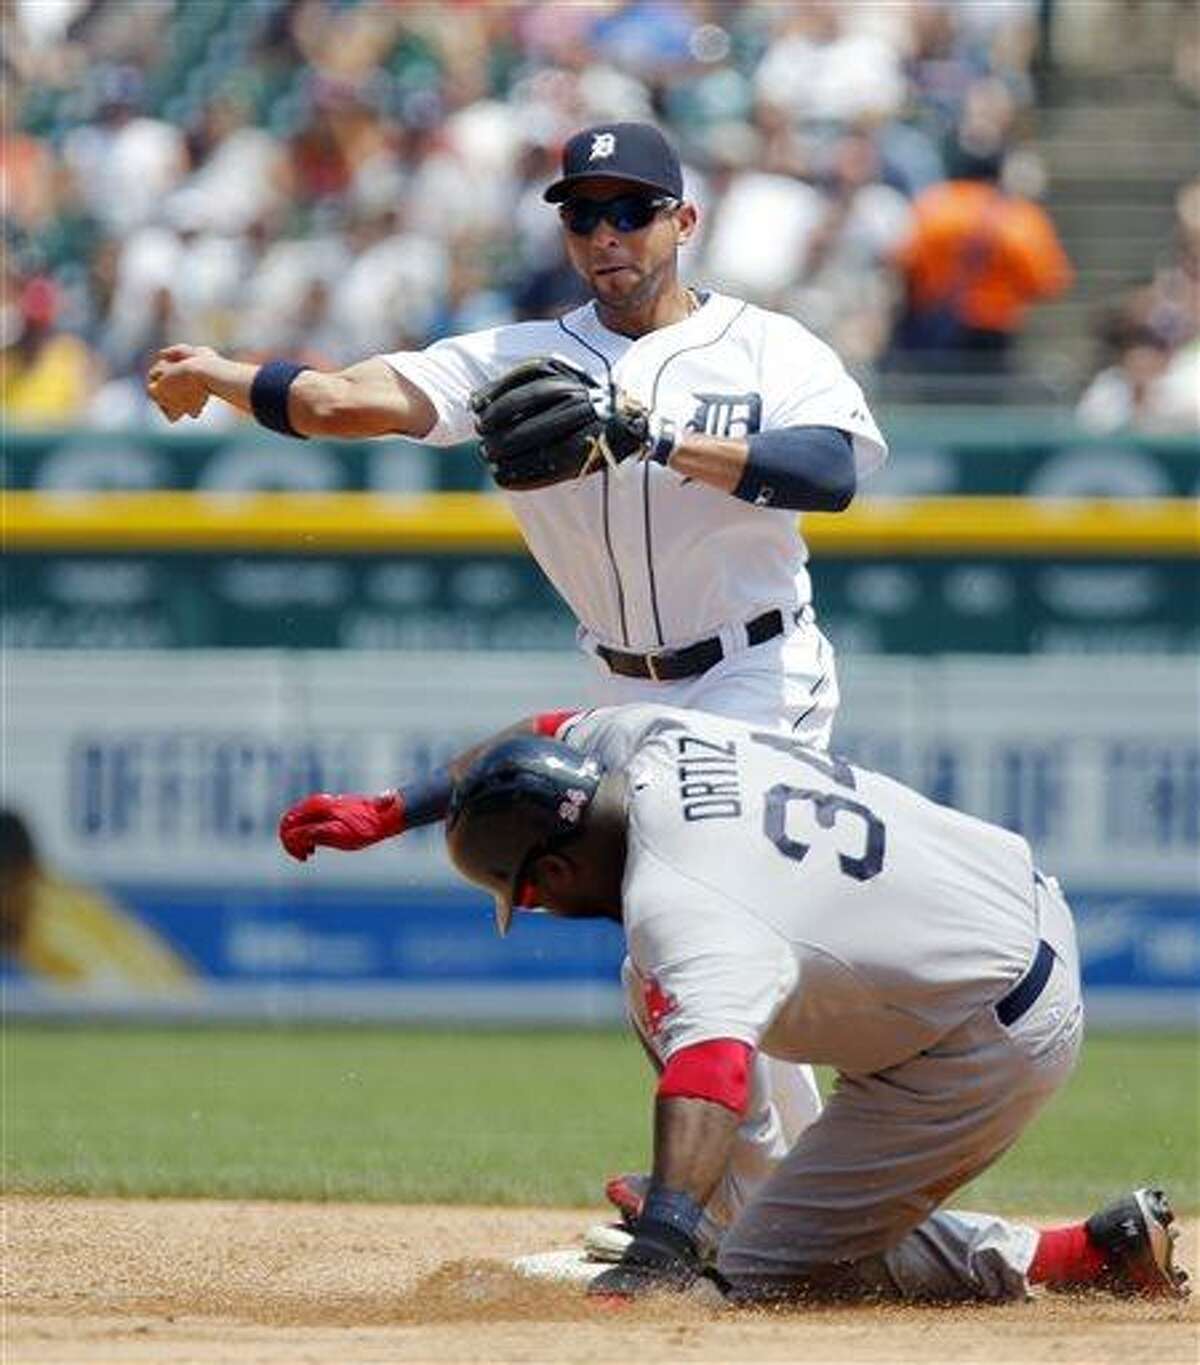 Detroit Tigers second baseman Omar Infante, top, turns the ball after getting a force-out on Boston Red Sox's David Ortiz (34) in the third inning of a baseball game on Sunday, June 23, 2013, in Detroit. Infante's throw was wild to first base and Red Sox's Mike Napoli was safe on the play. (AP Photo/Duane Burleson)